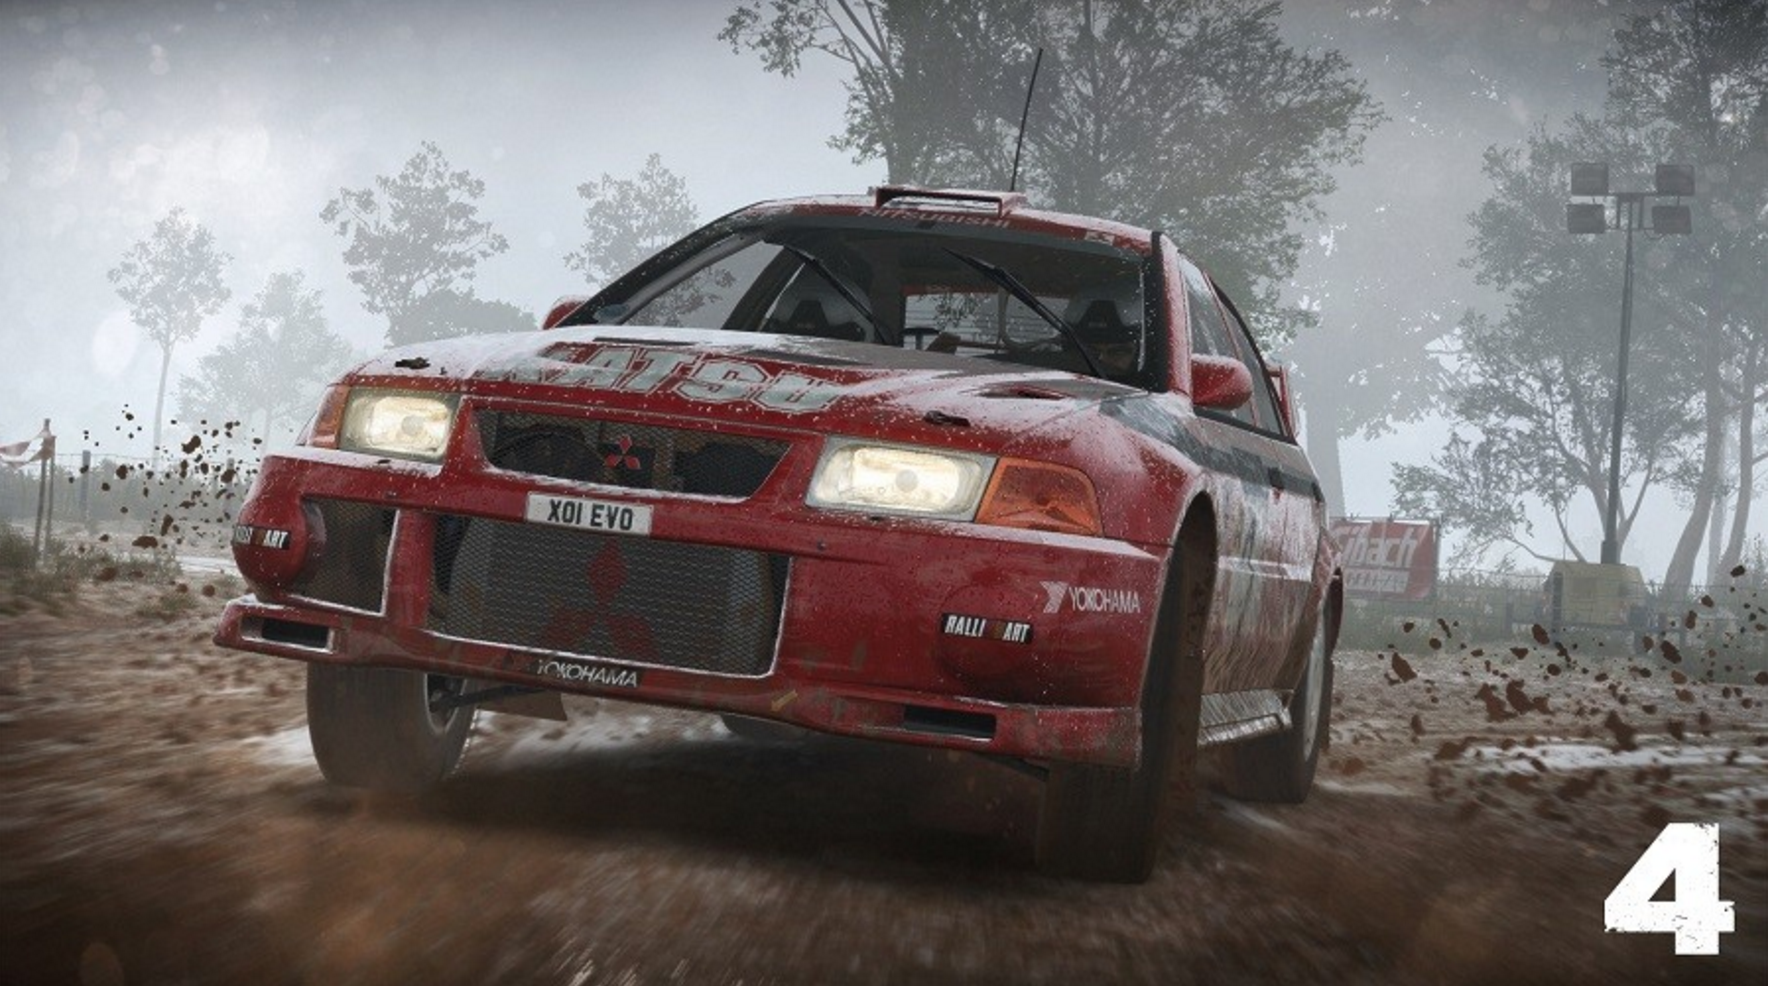 What is DiRT 4?